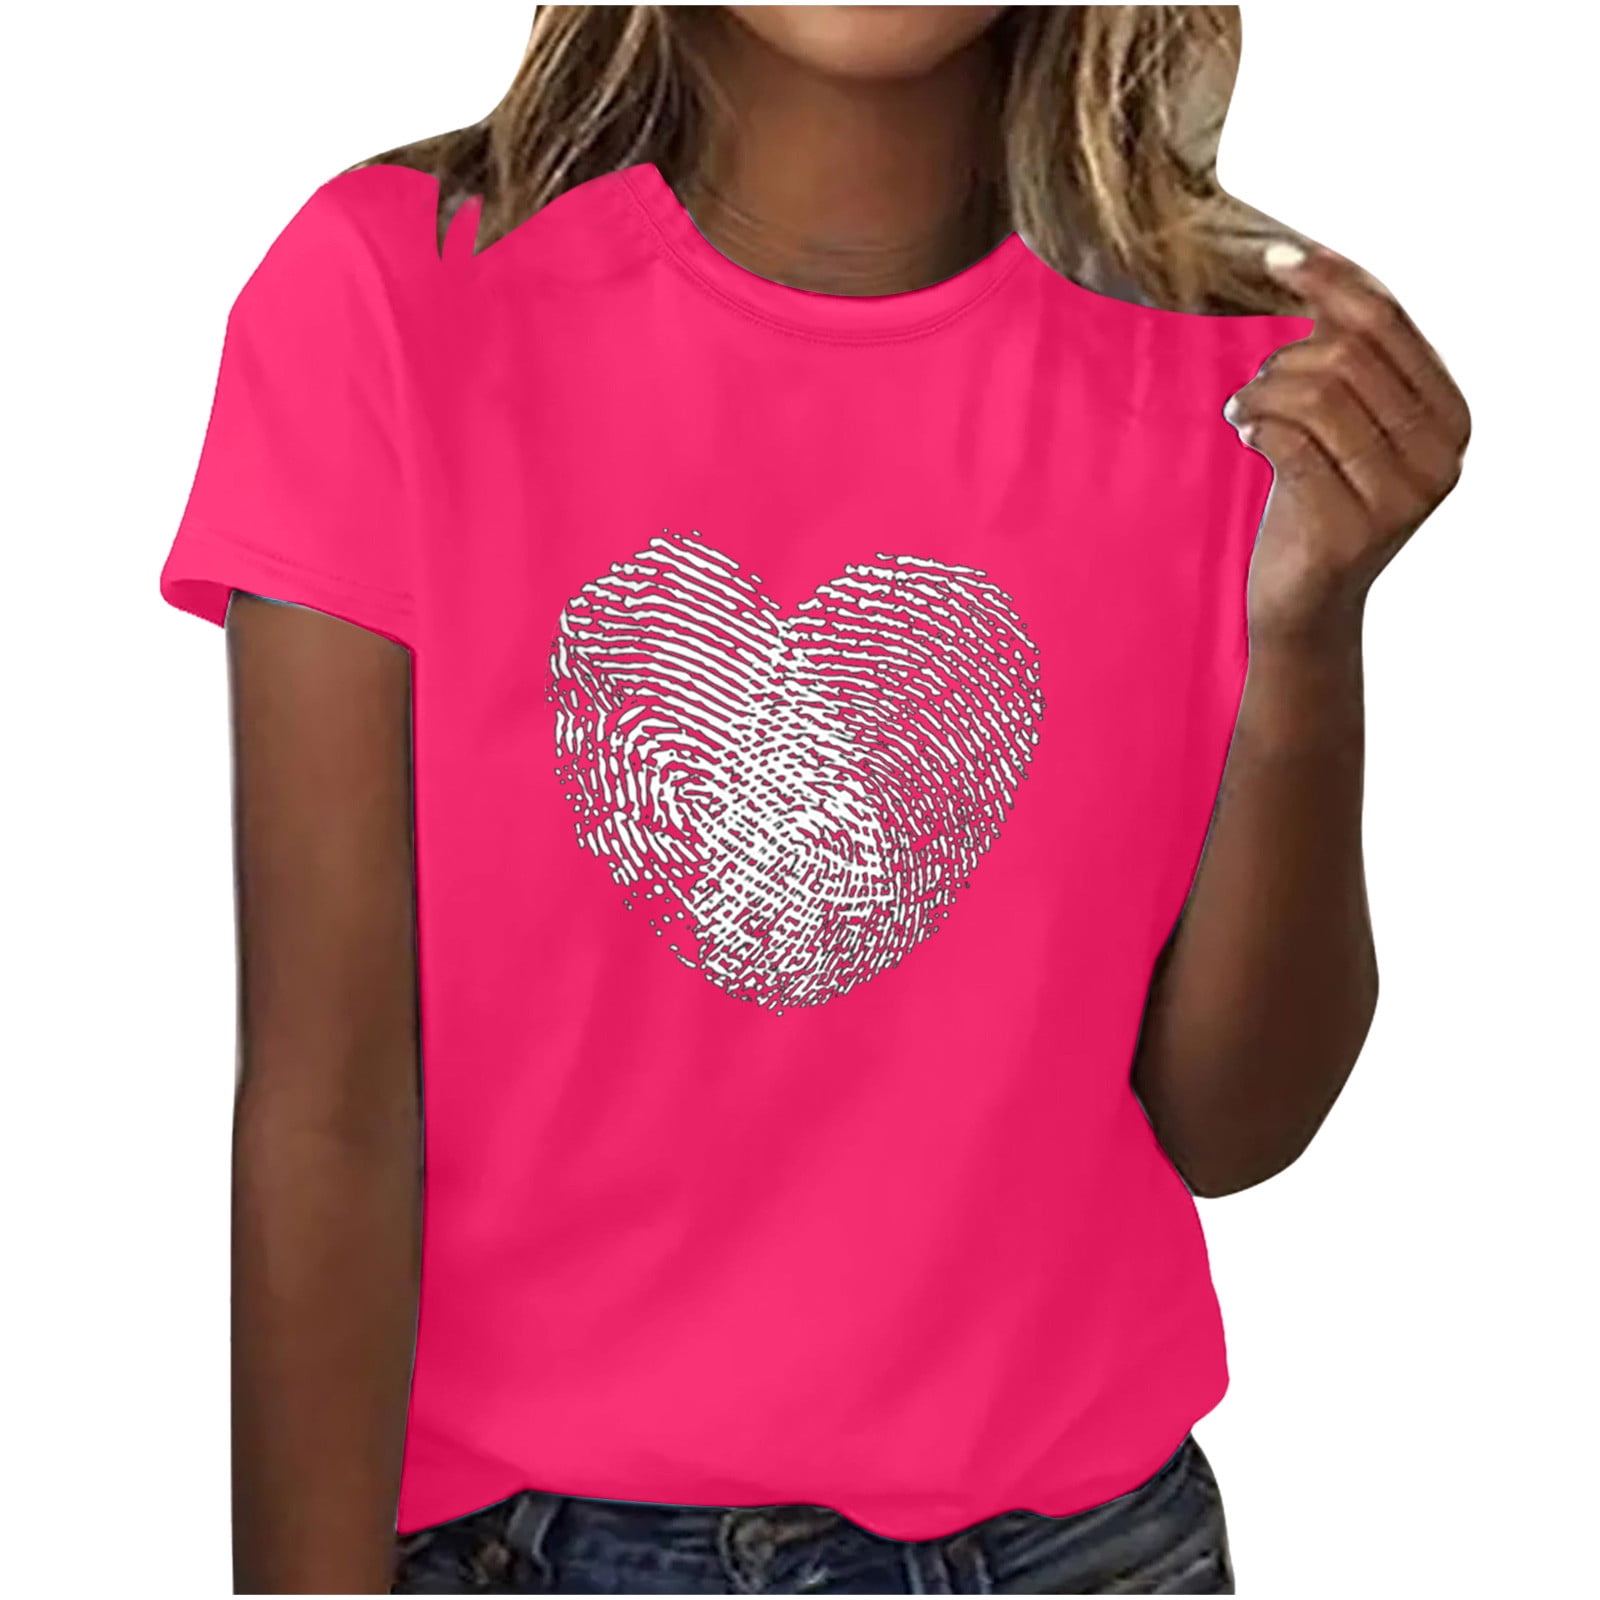 HAPIMO Women's Valentine's Day Shirts Heart Print Tops Short Sleeve Tees  O-Neck T-shirt Comfy Casual Blouses Regular Fit Clothes for Girls Hot Pink  XL